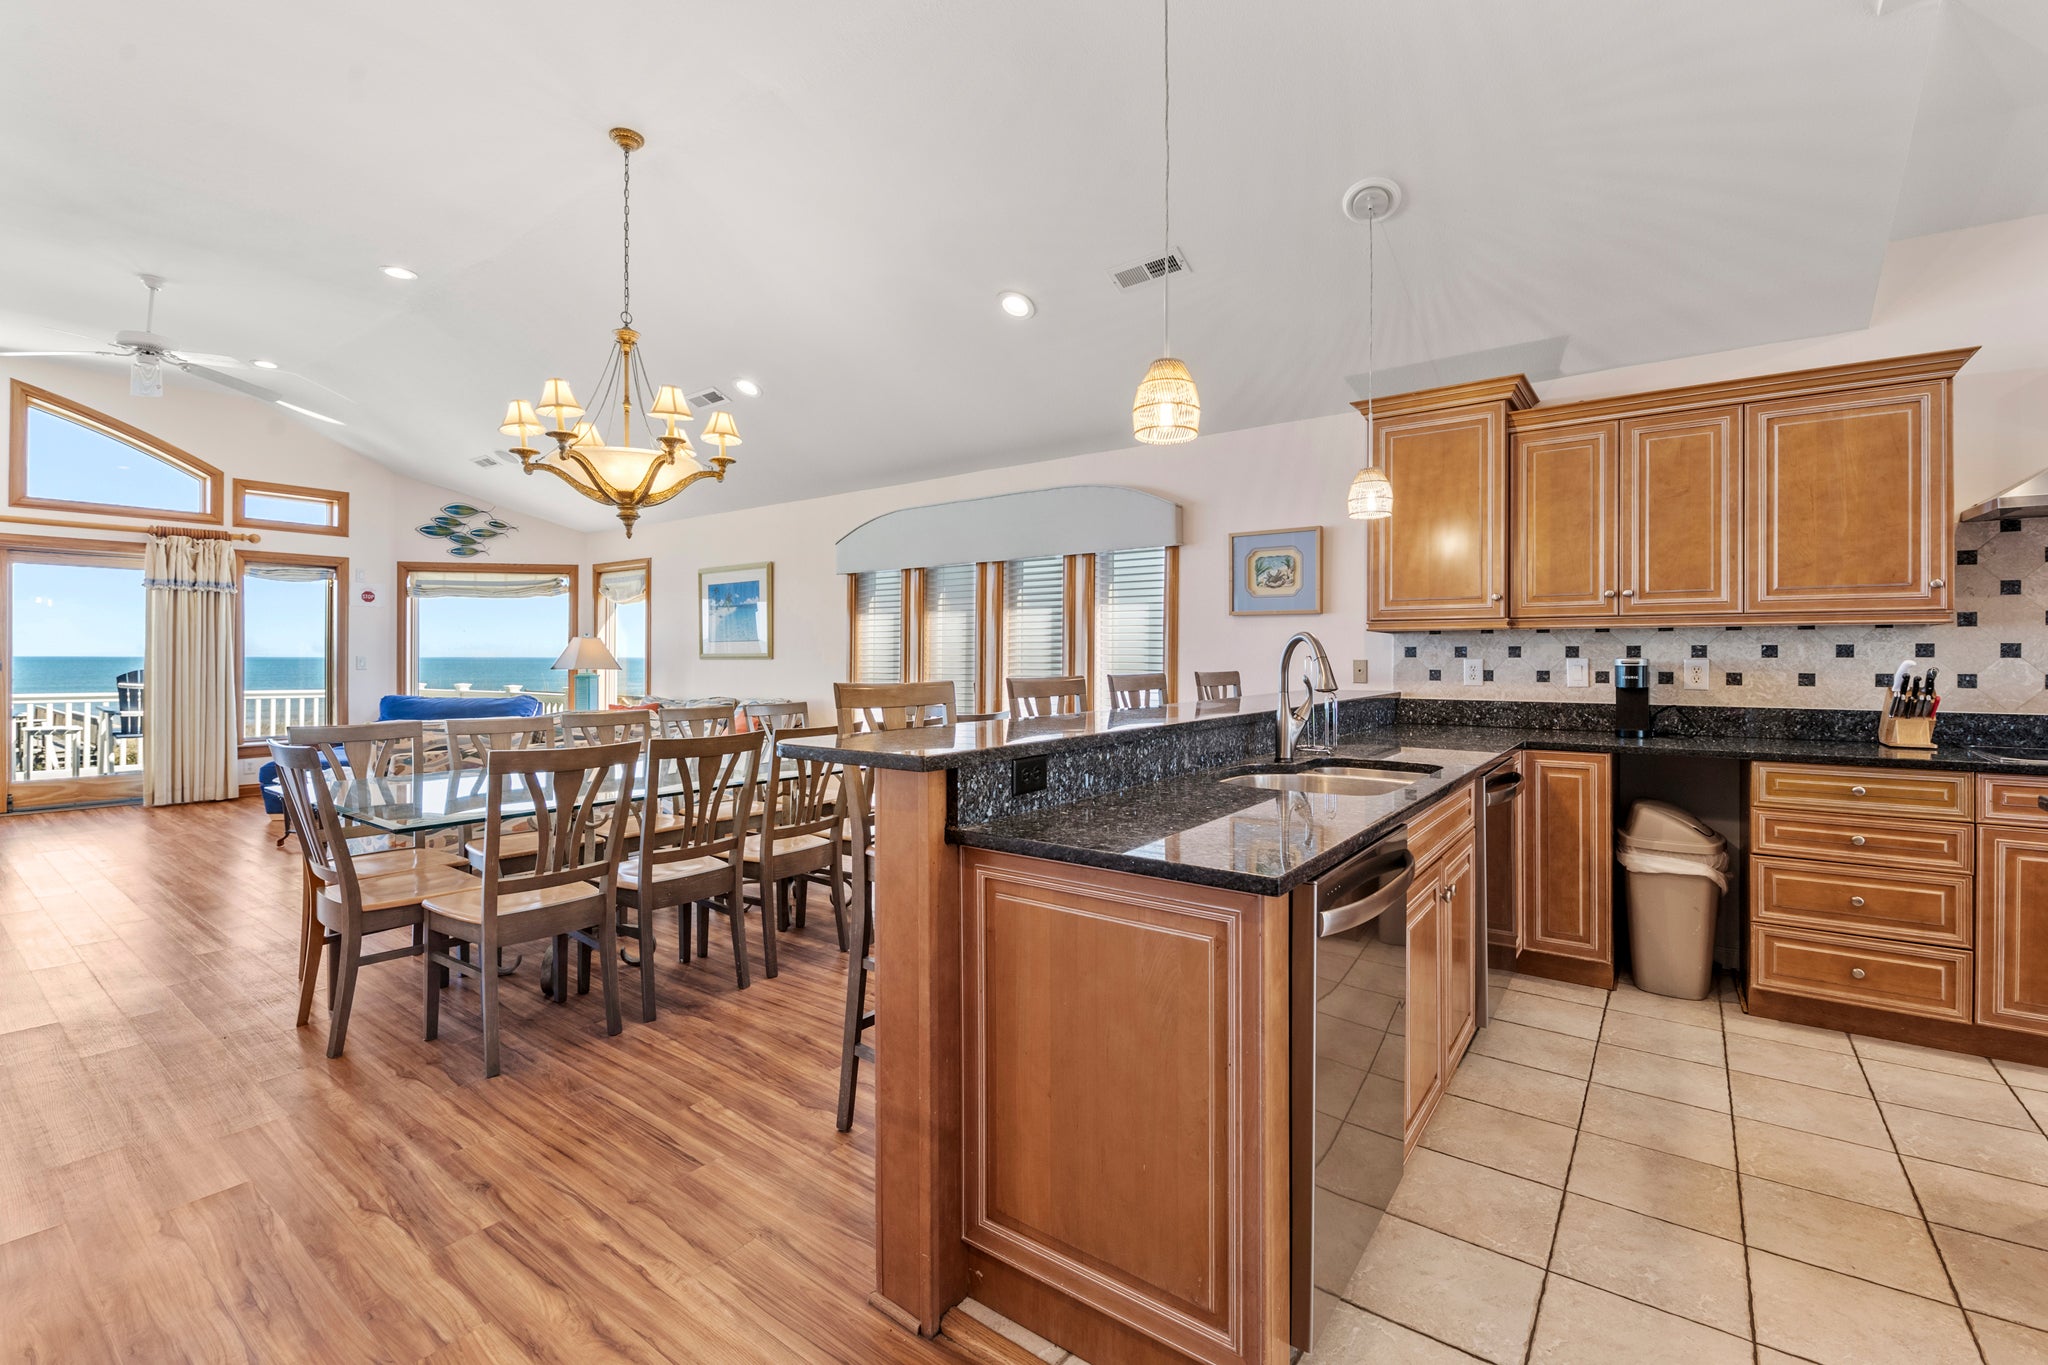 JR12:  Carolina Dream | Top Level Dining Area and Kitchen